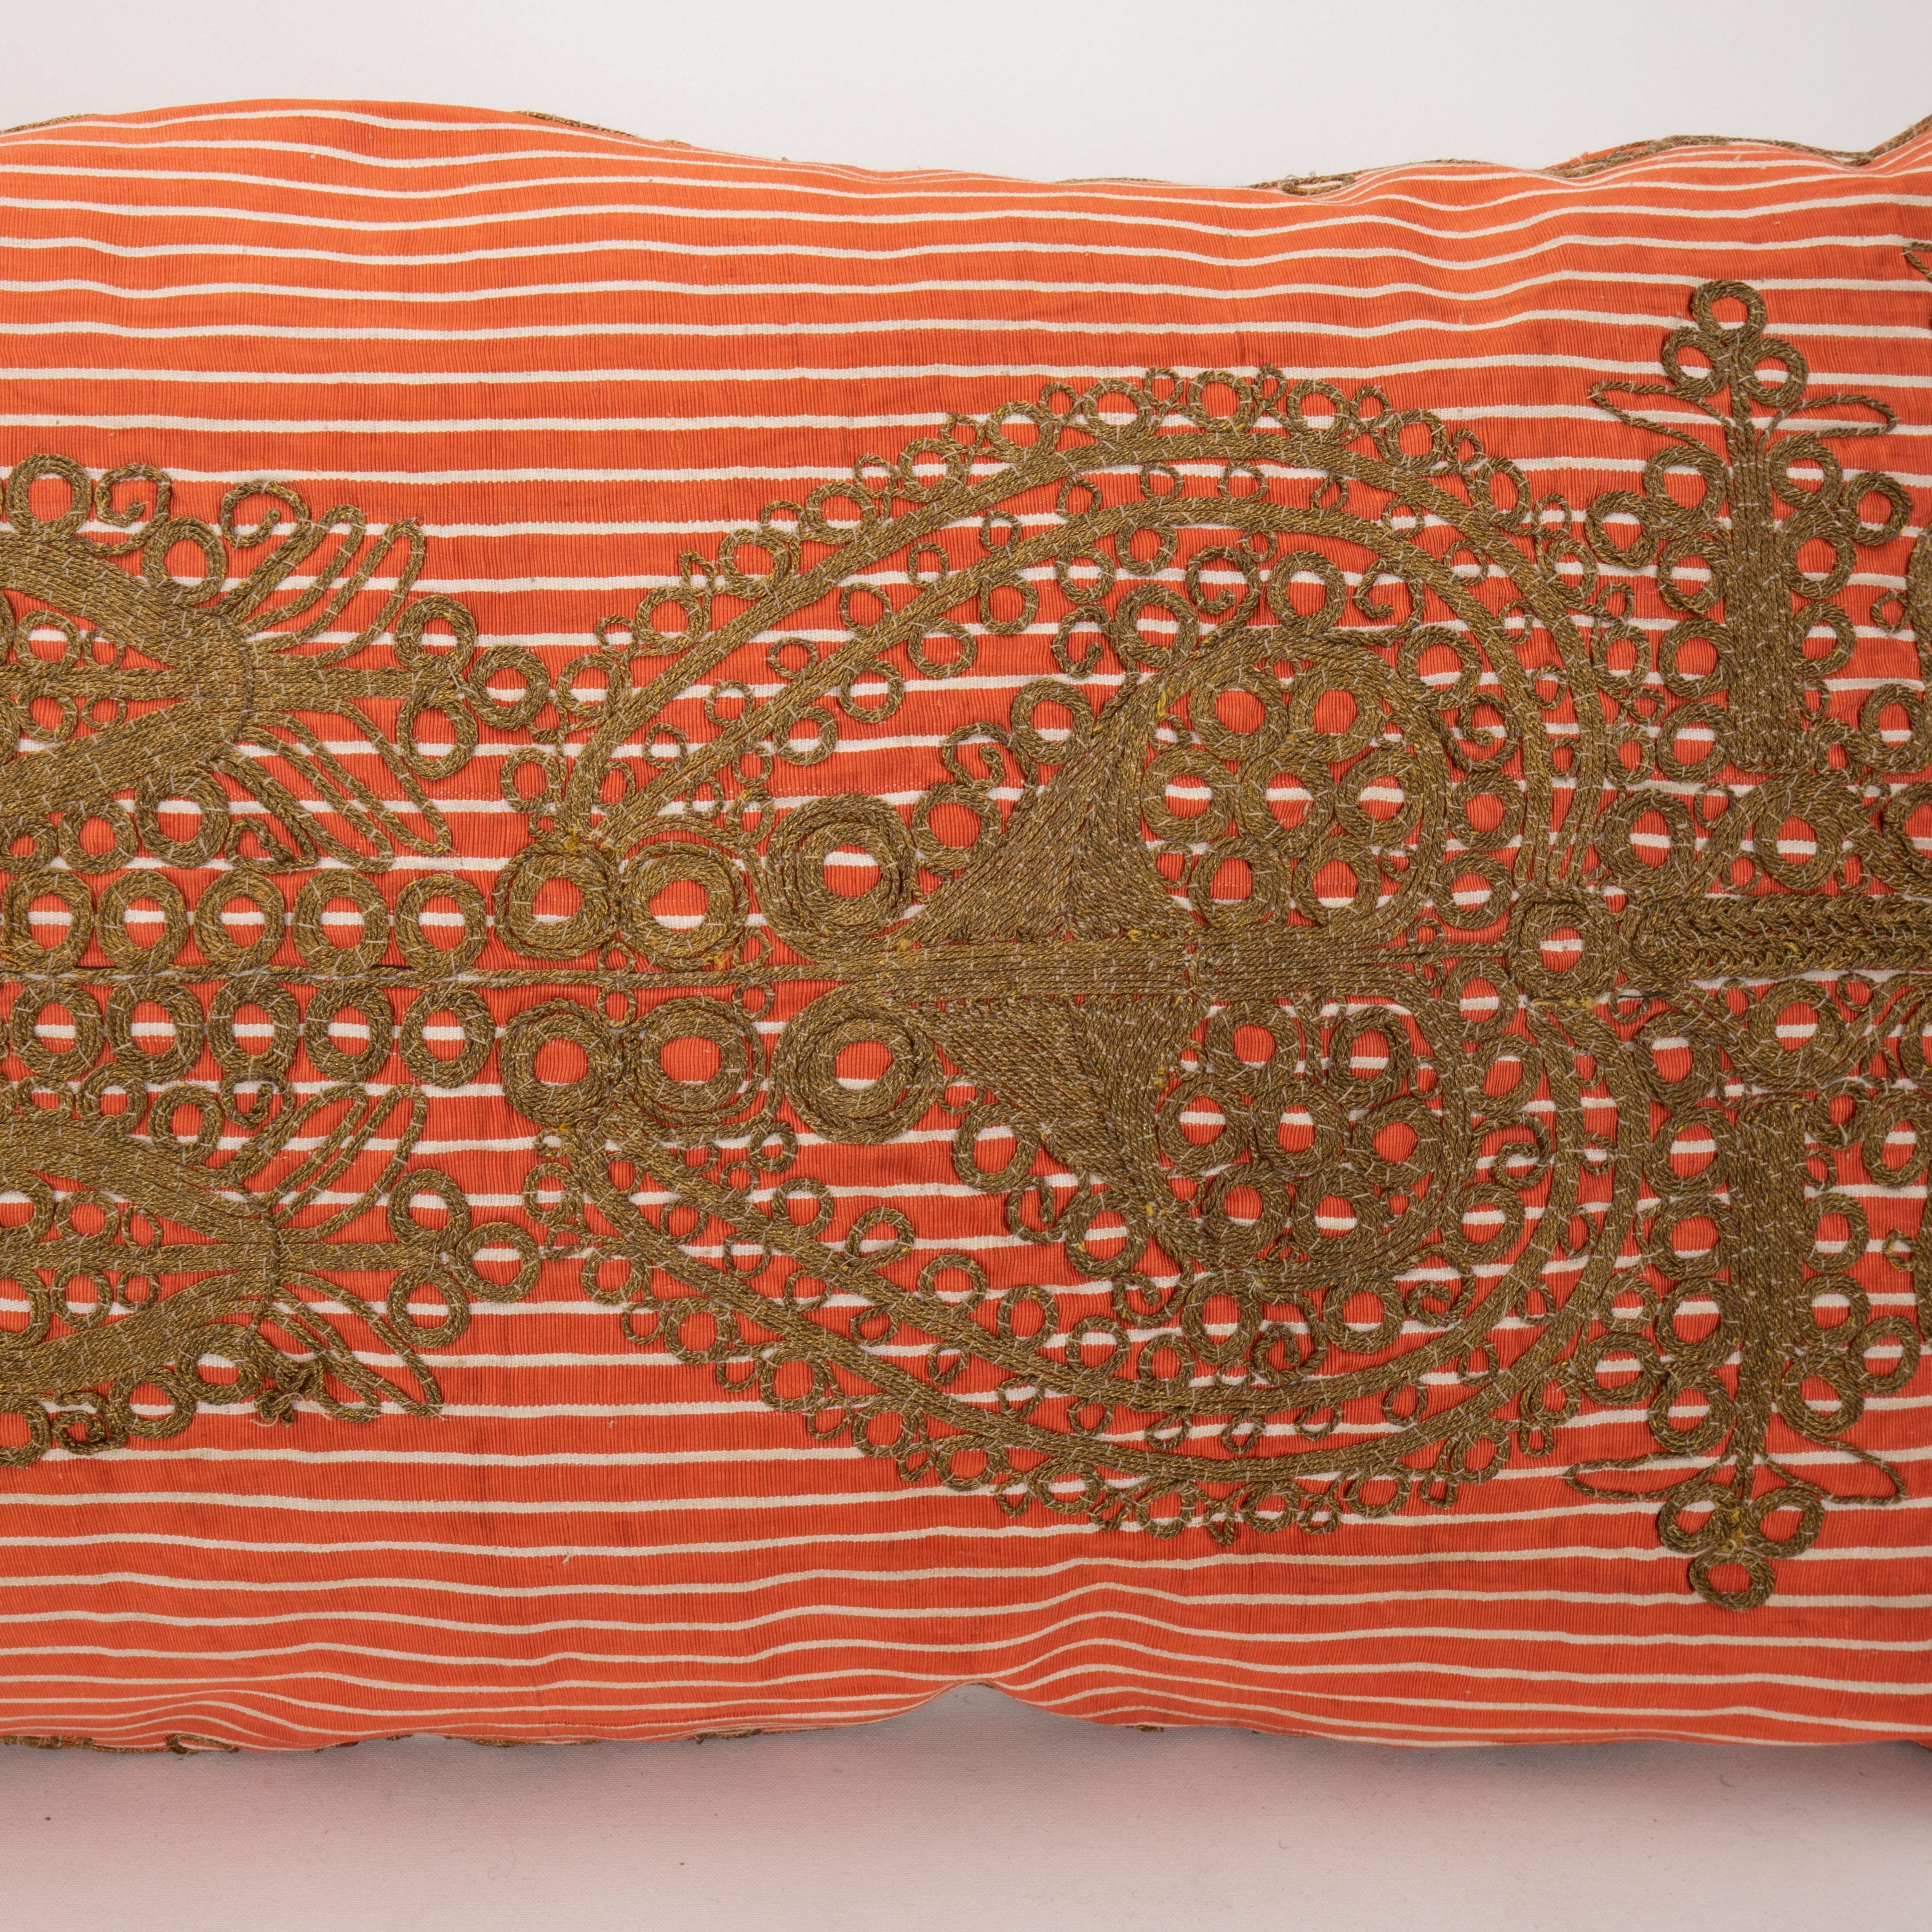 Embroidered Antique Ottoman Turkish Pillow Case, Early 20th C. For Sale